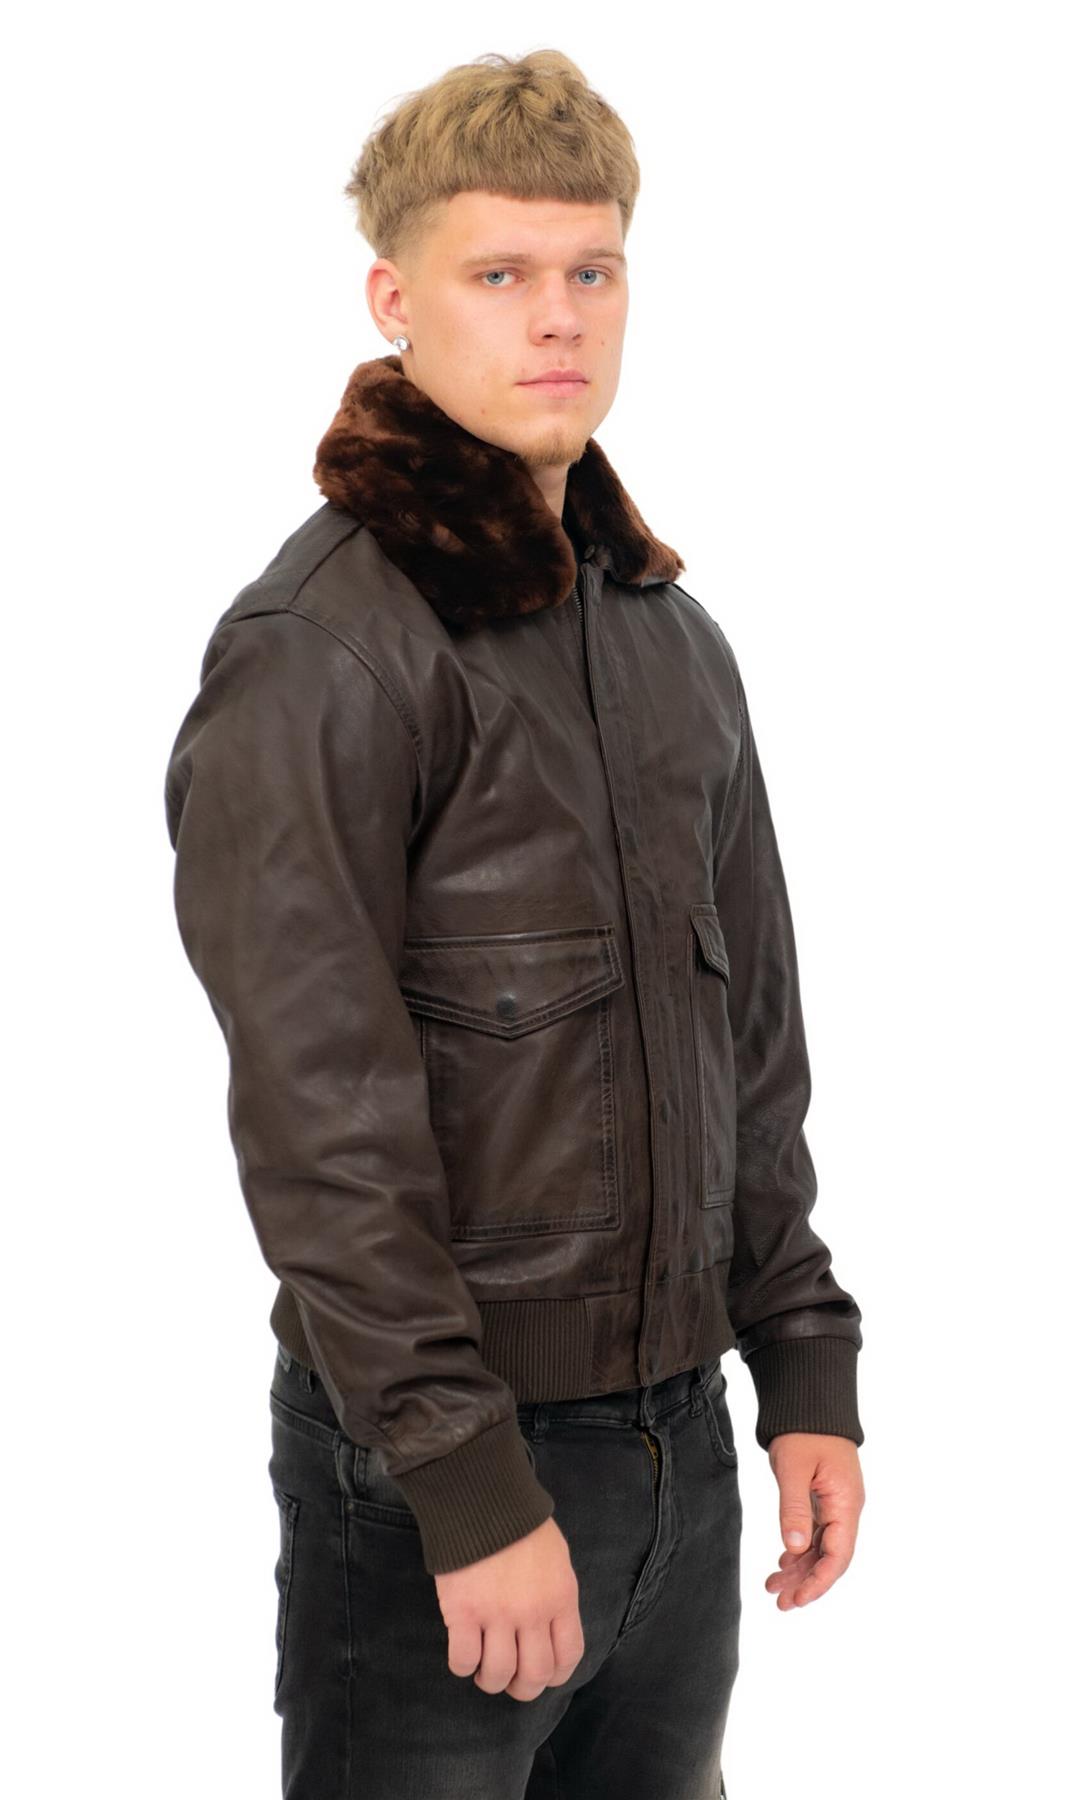 Men's Air Force A2 Brown Aviator Leather Bomber Jacket-Sao Paulo